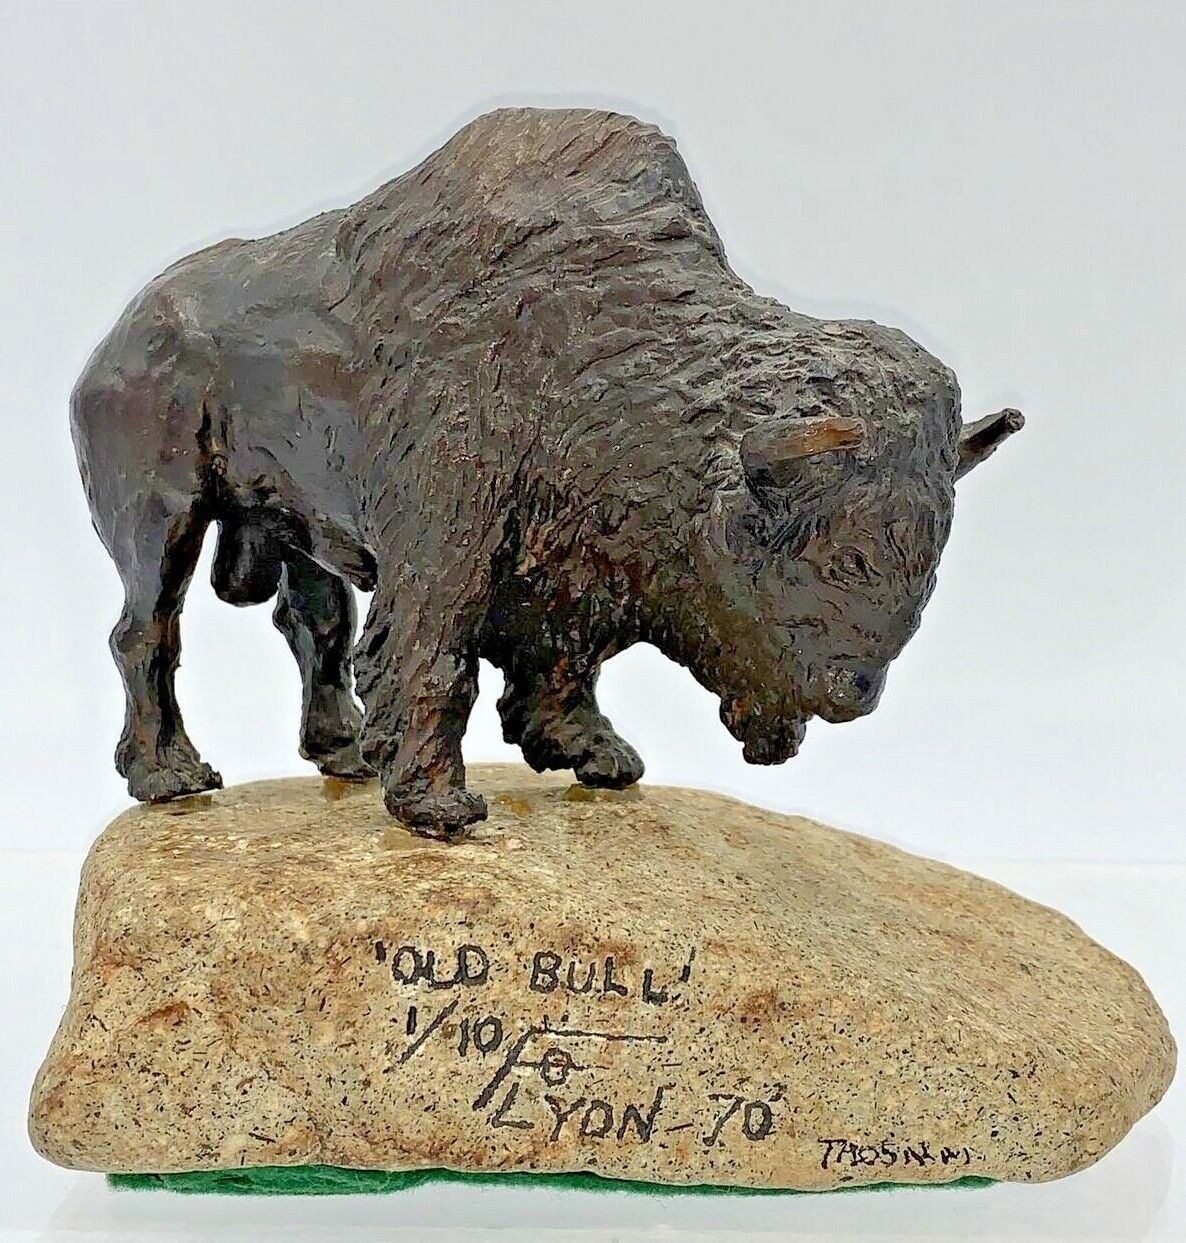 Frank O Lyon “Old Bull” 1/10 Bronze Statue 1970 Taos New Mexico LISTED ARTIST